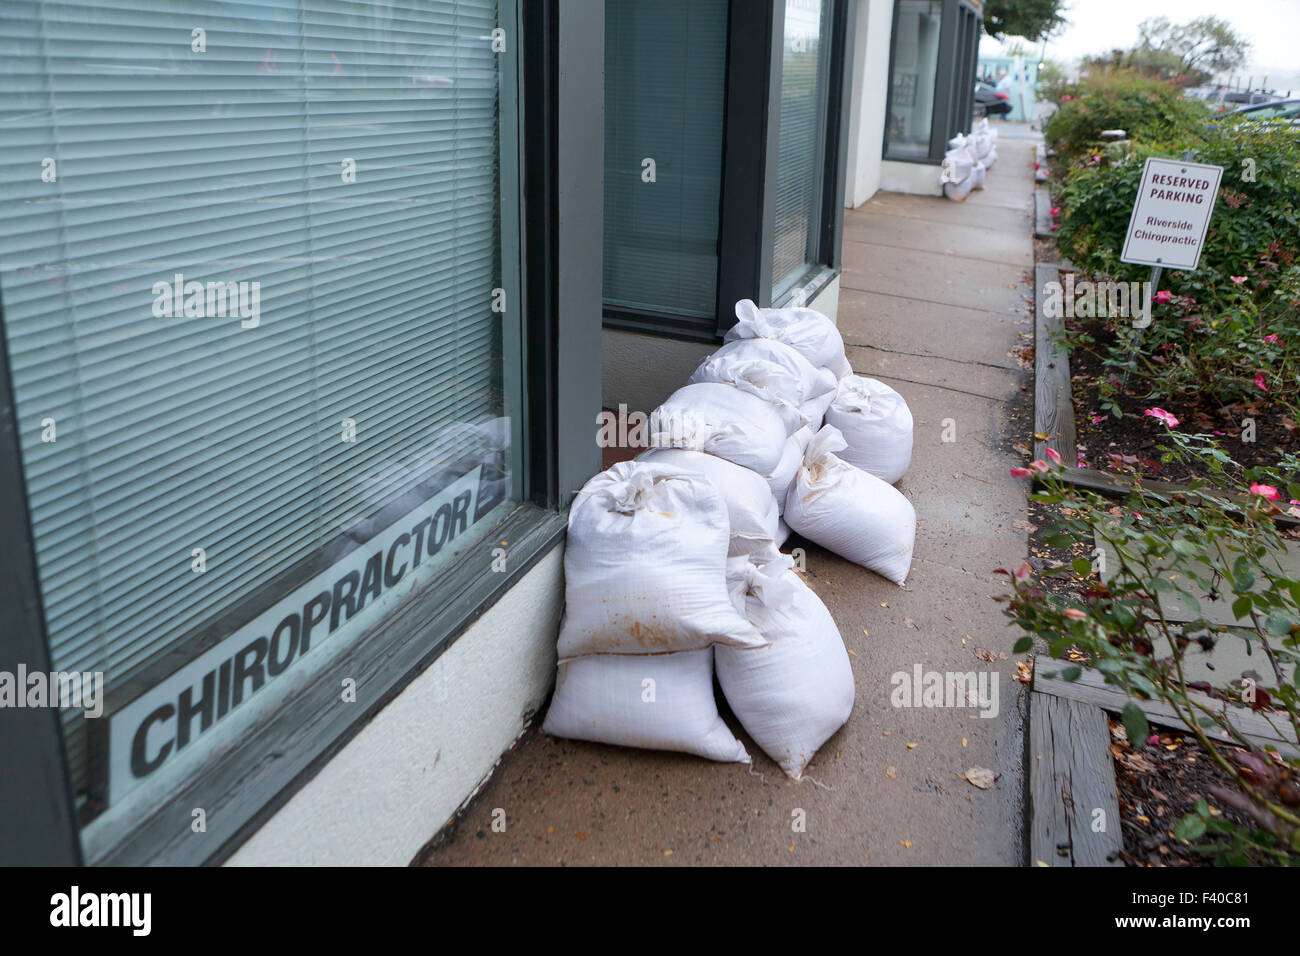 Sandbags placed at business building entrance in preparation for flooding - Alexandria, Virginia USA Stock Photo